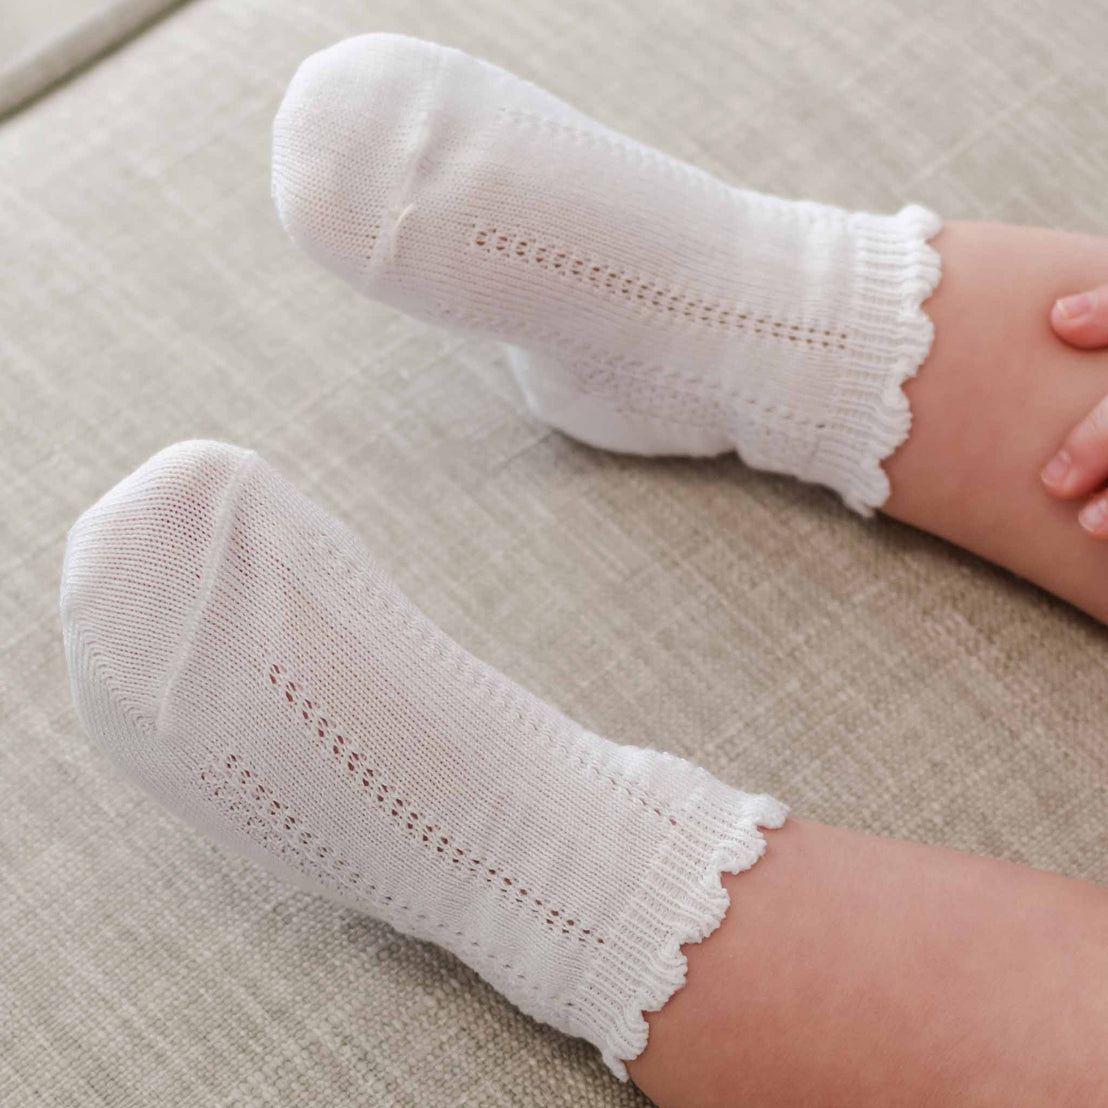 A close-up image of a child's feet wearing white, cotton Pattern Socks against a soft beige background. The socks feature a delicate lace pattern along the scalloped cuff.